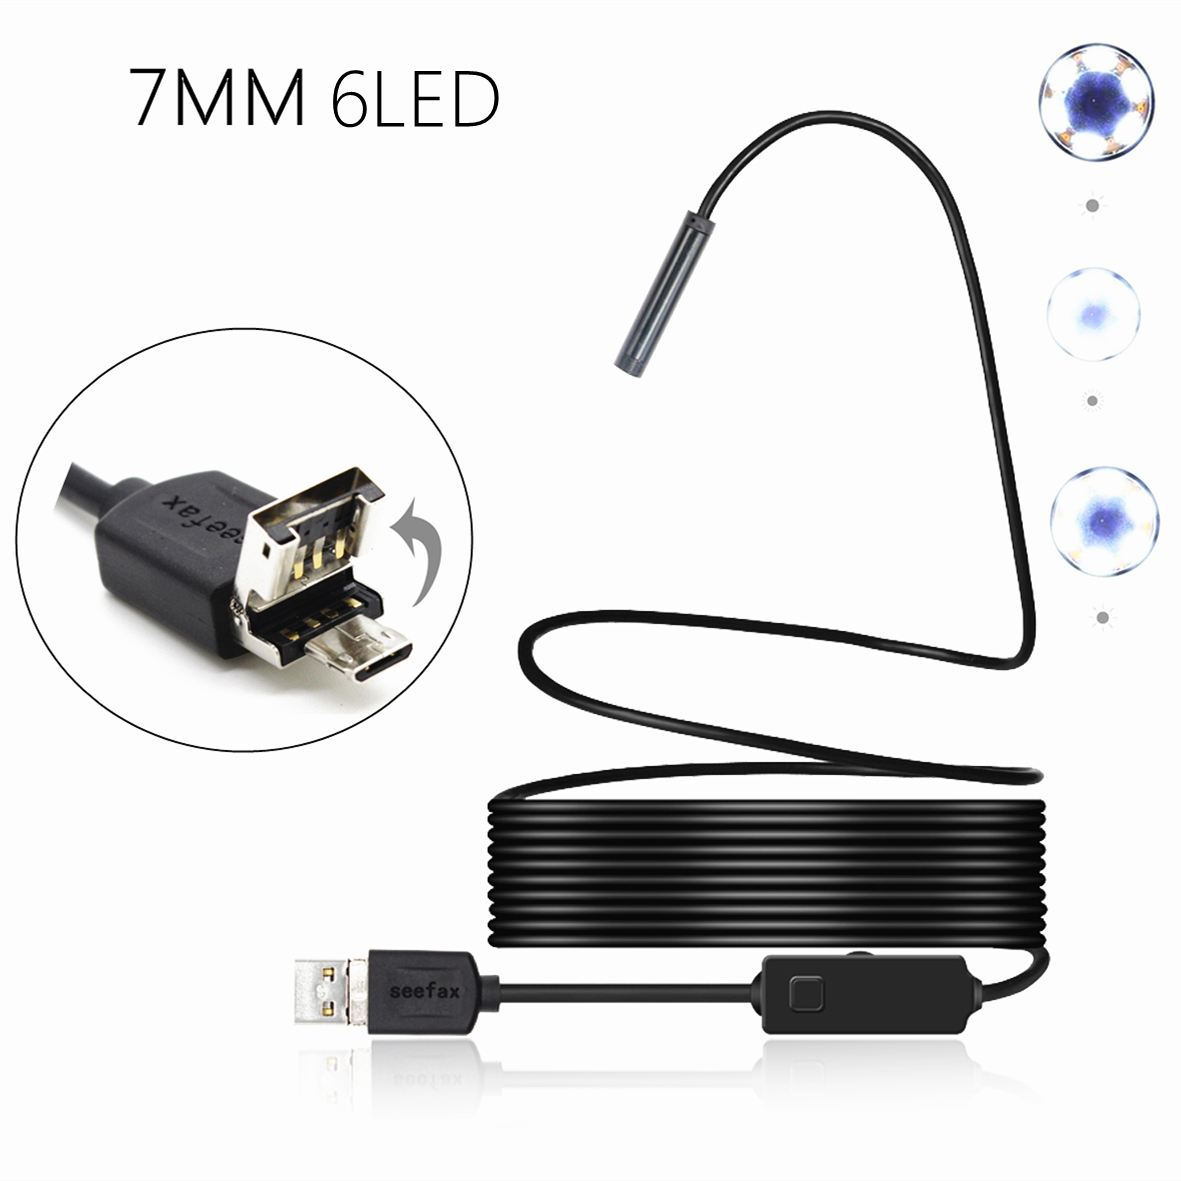 

2 in 1 7mm 6LED IP67 Micro USB/USB Endoscope Borescope Inspection Camera Soft Cable for Android PC